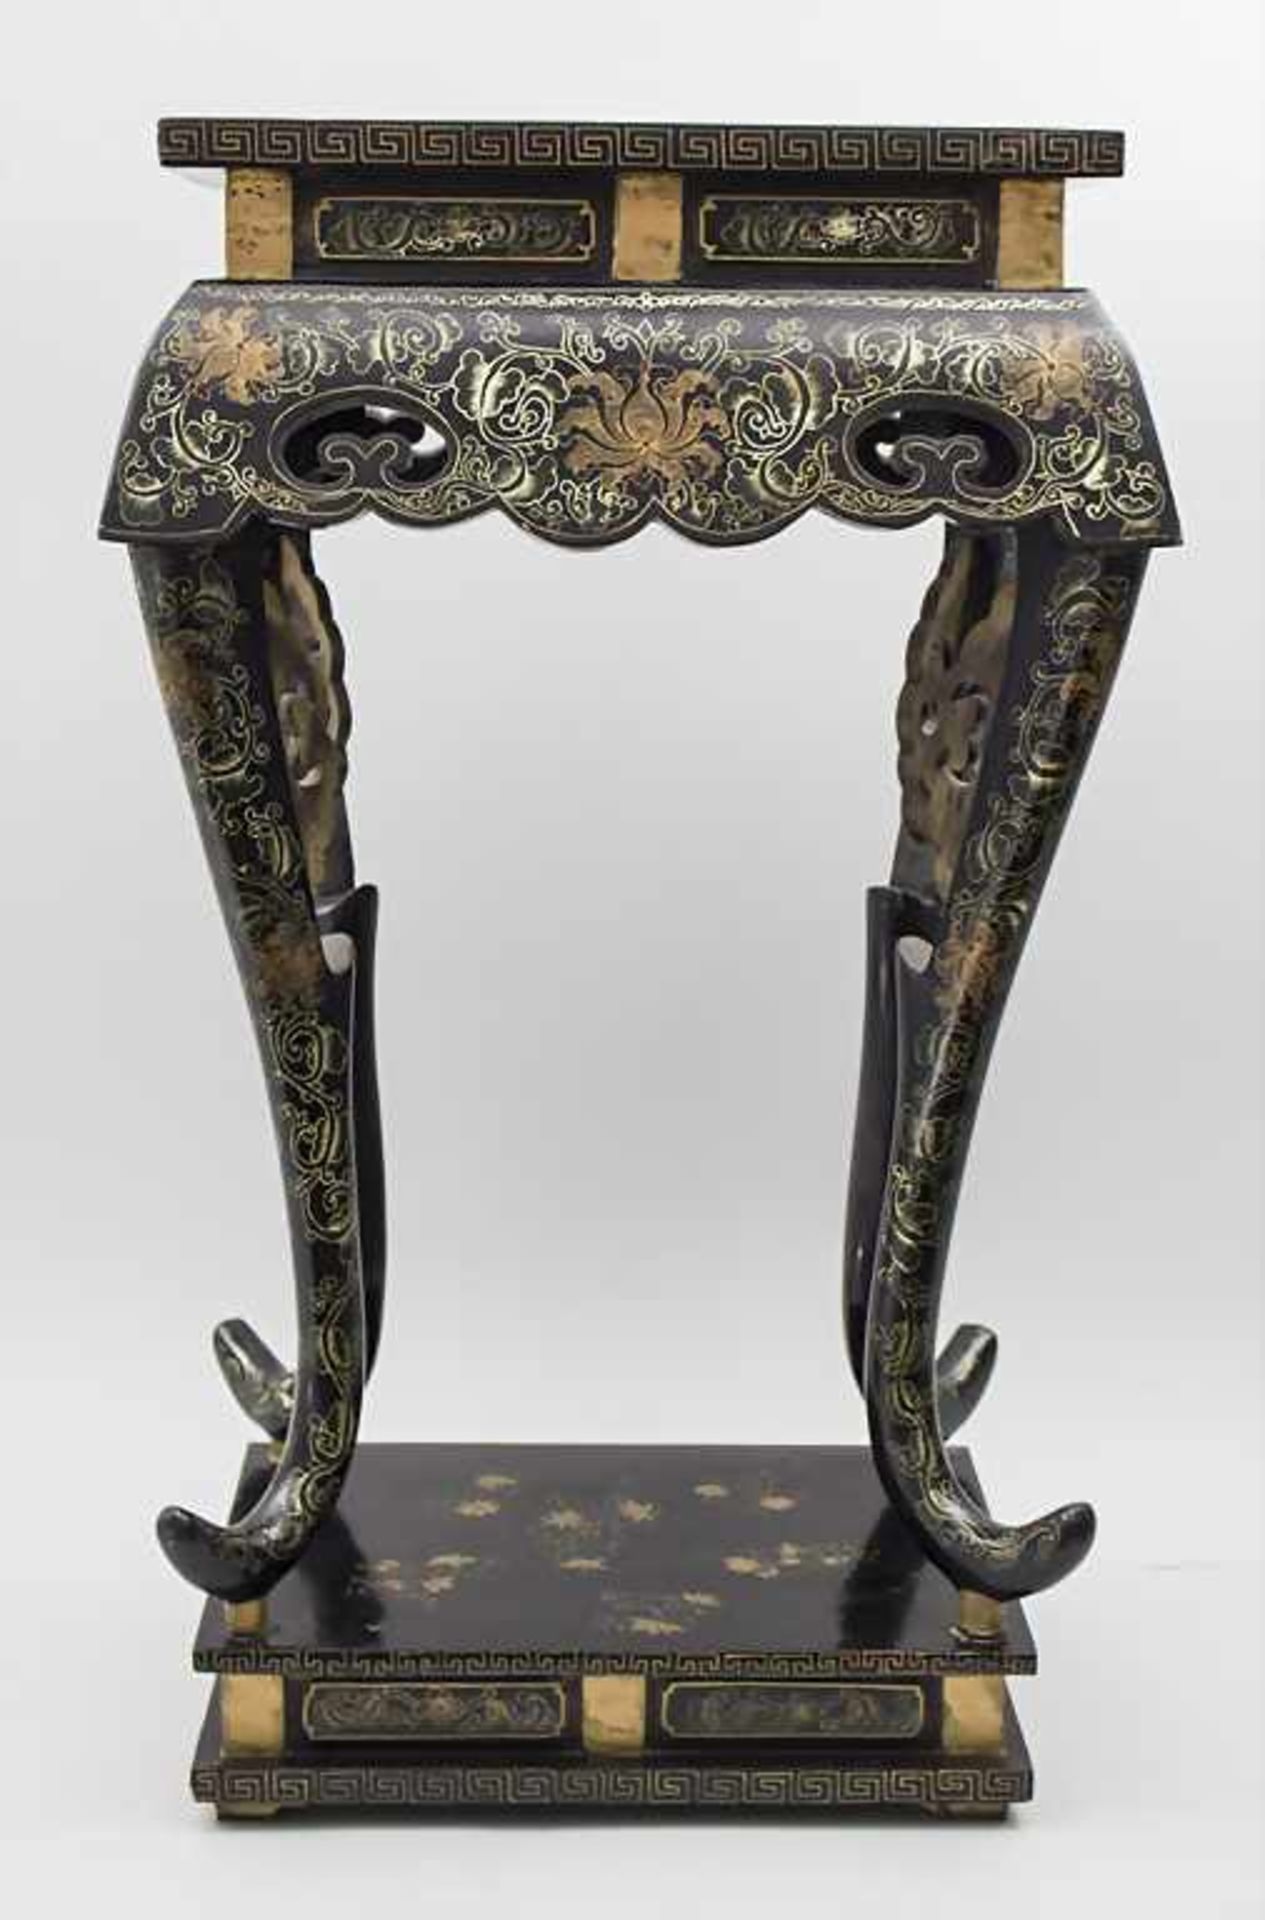 Lacktisch / A lacquer table, China, 20. Jh. - Image 2 of 8